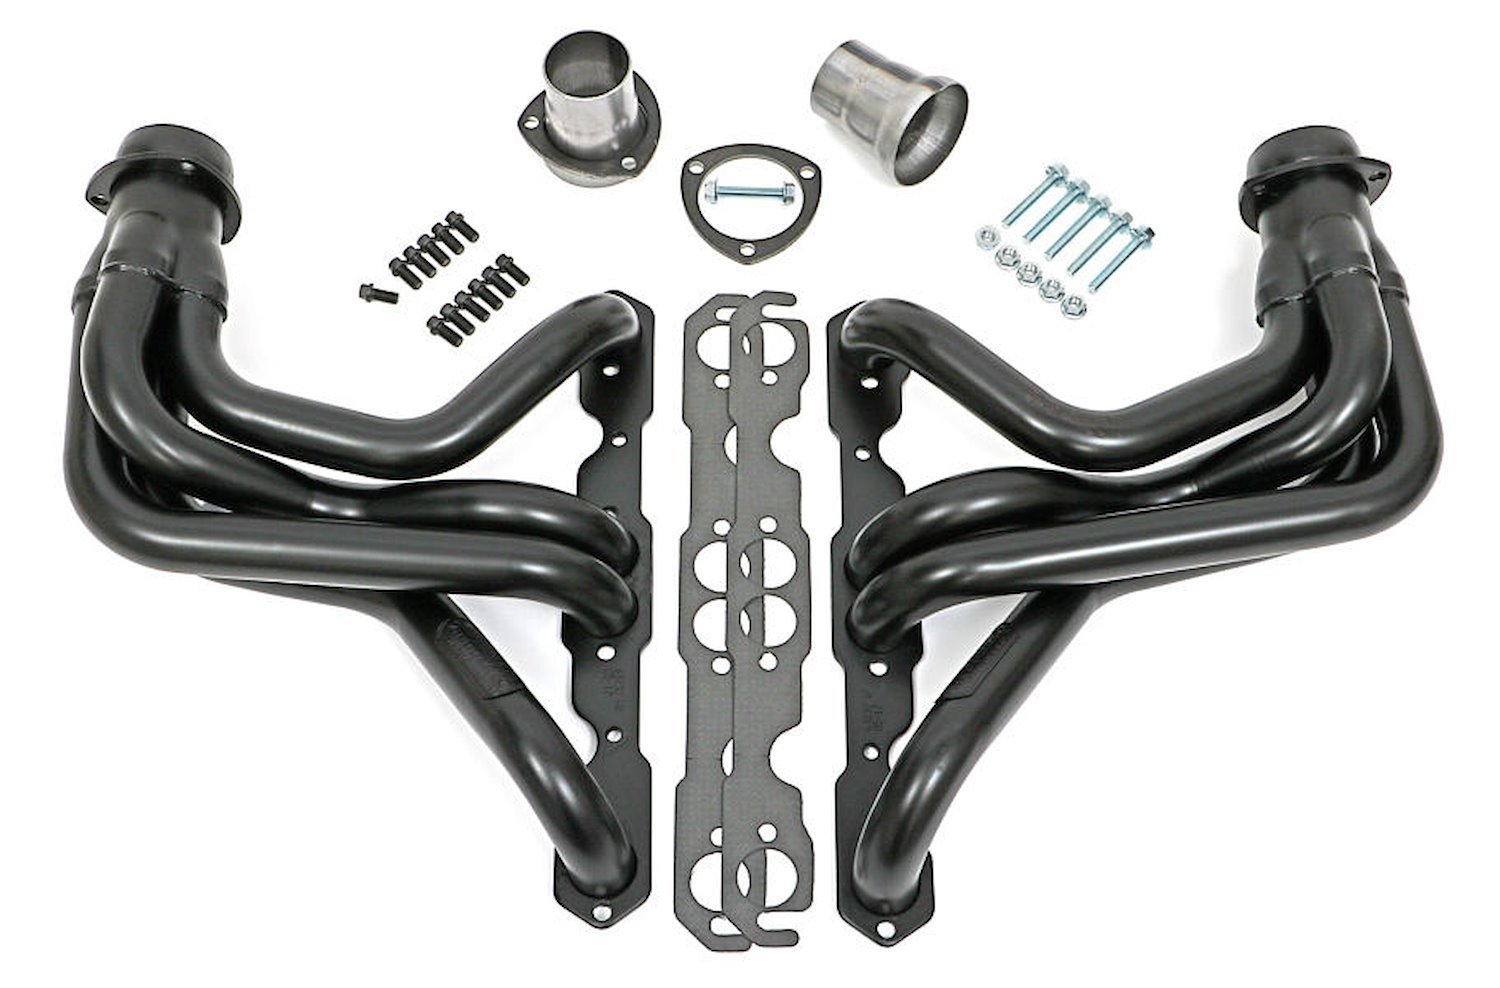 69230 Standard Duty Uncoated Full Length Headers for 1967-86 Chevy/GMC Blazer, Jimmy, Suburban 4WD